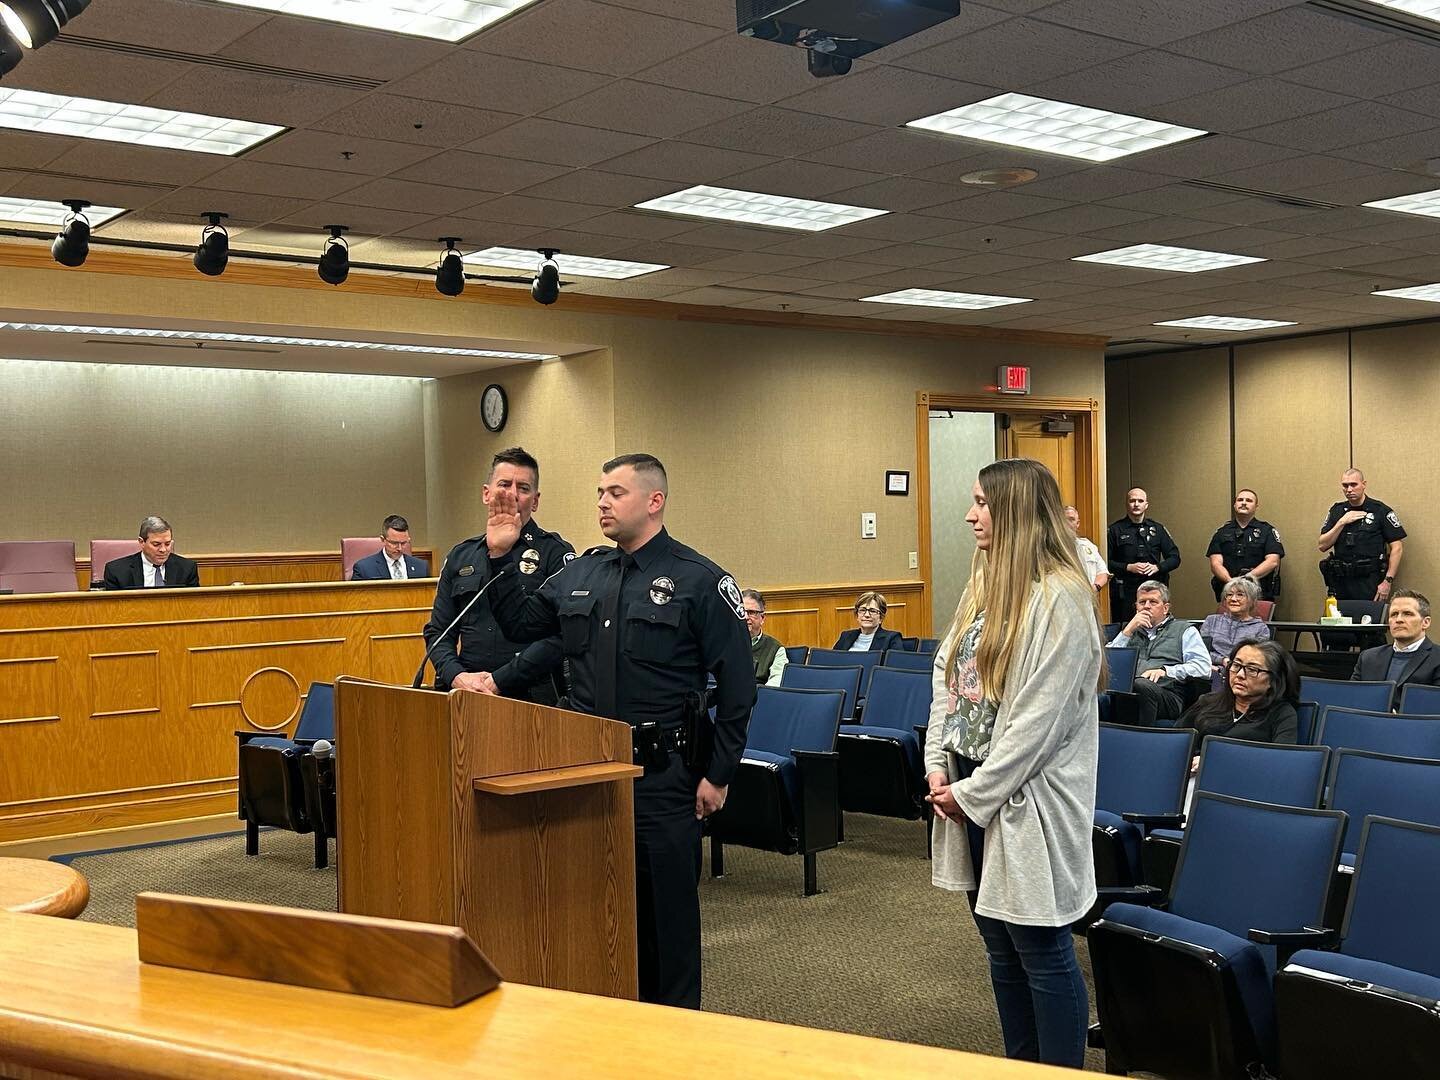 Last night at the City Commission meeting, we swore in our newest Brentwood Police Dept. officer, Dan Odendahl. Please welcome him to Brentwood.